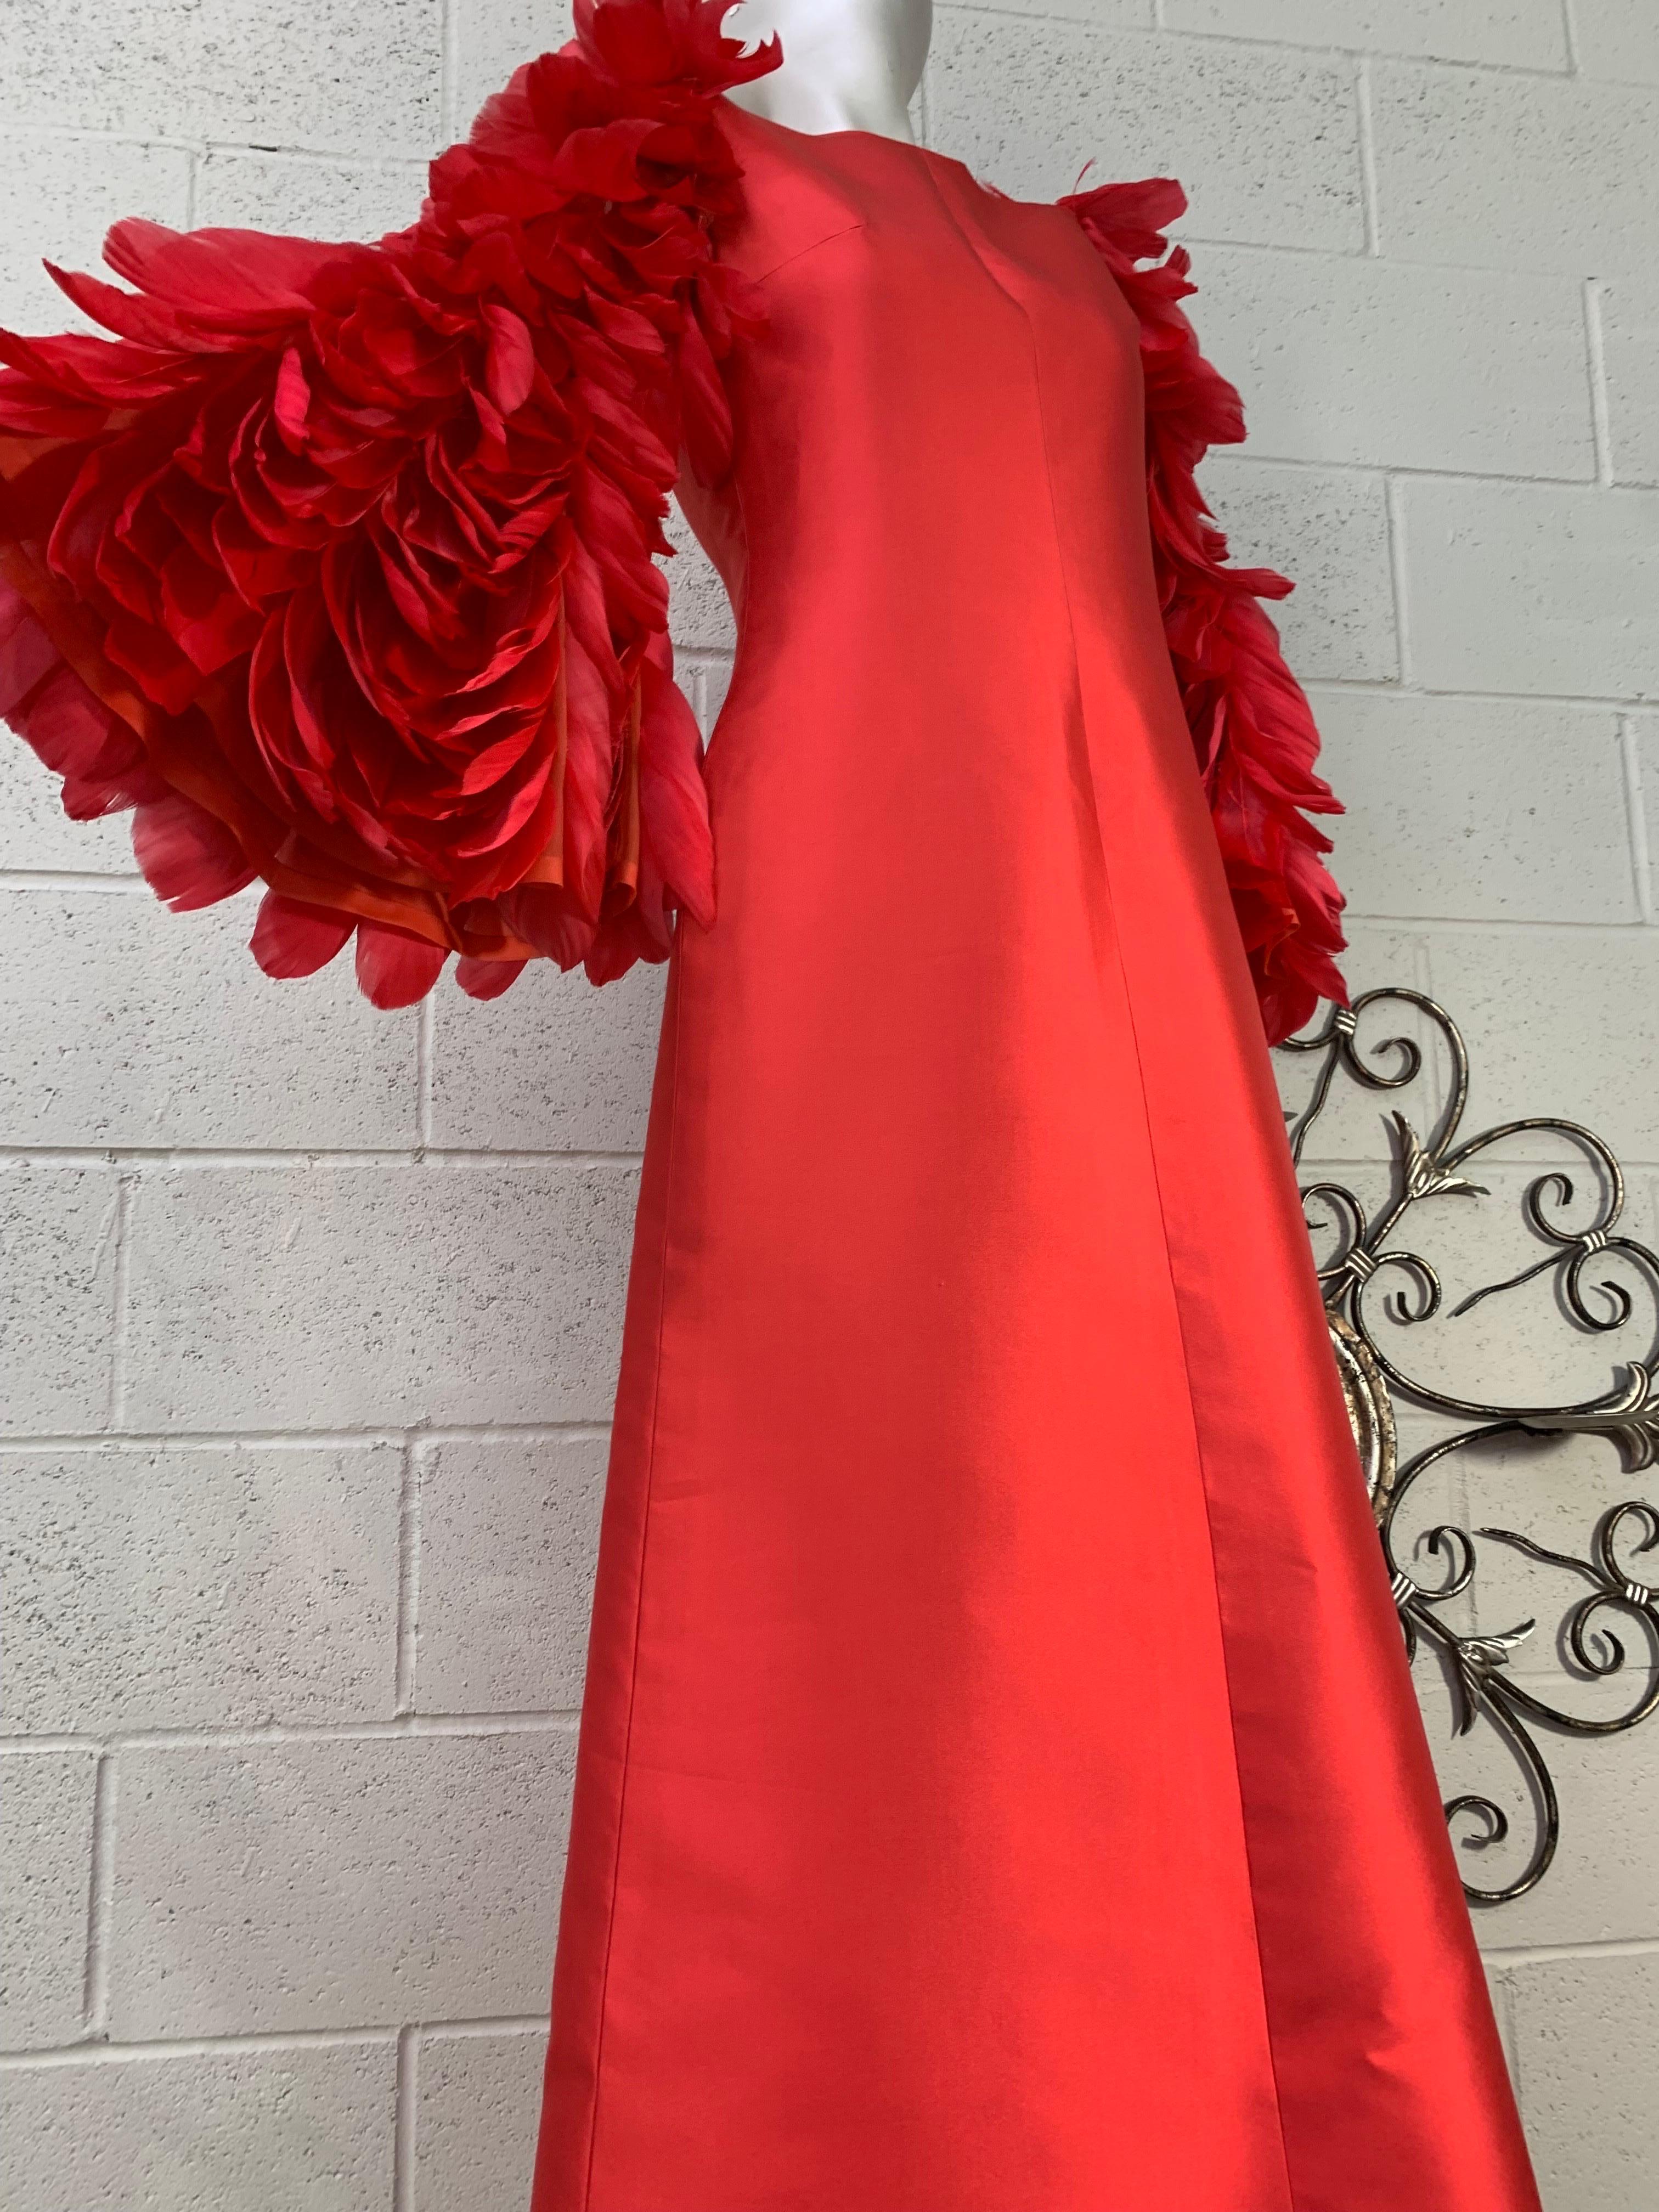 1960 Joui Schiesser Haute Couture Red Silk Gazar Gown w Feathered Bell Sleeves In Excellent Condition For Sale In Gresham, OR